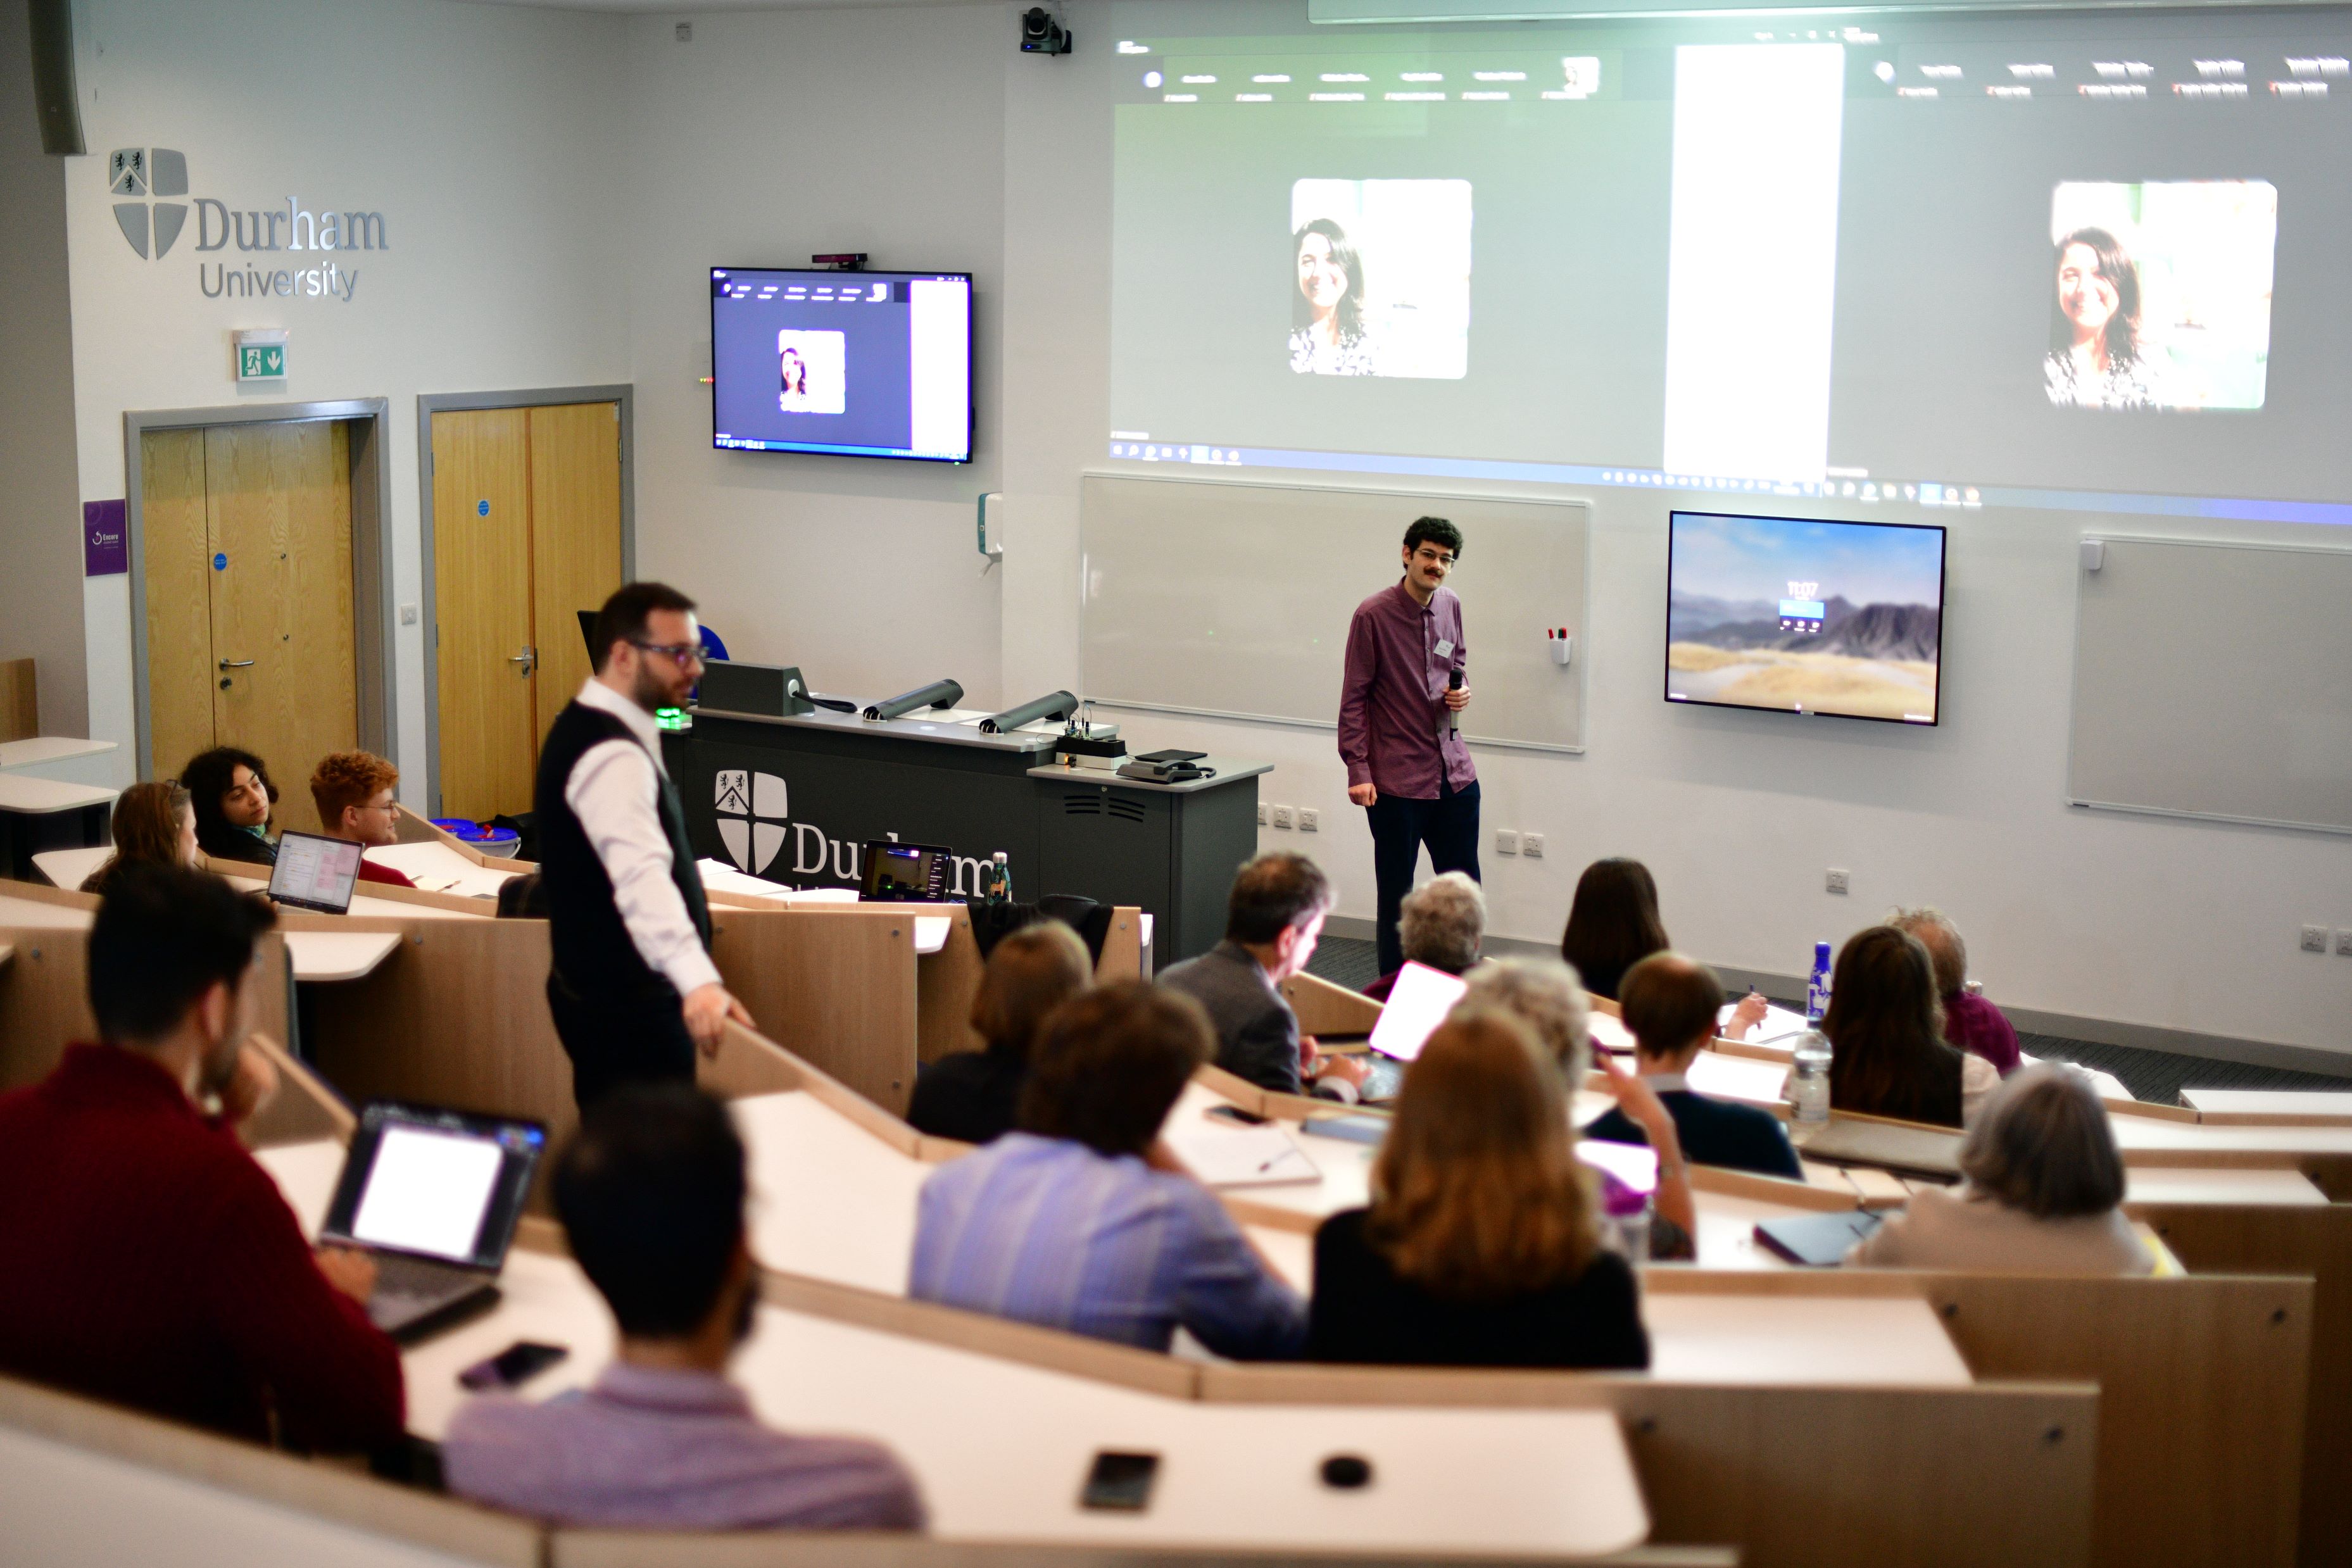 View from a back of a full lecture theatre with tiered seating. One conference organiser stands on the central steps halfway up the theatre, another stands in the front of the lecture theatre. People are engaging in discussion and many have their laptops open or paper out on the tables to take notes. There are screens at the front of the lecture theatre with people attending the event online.